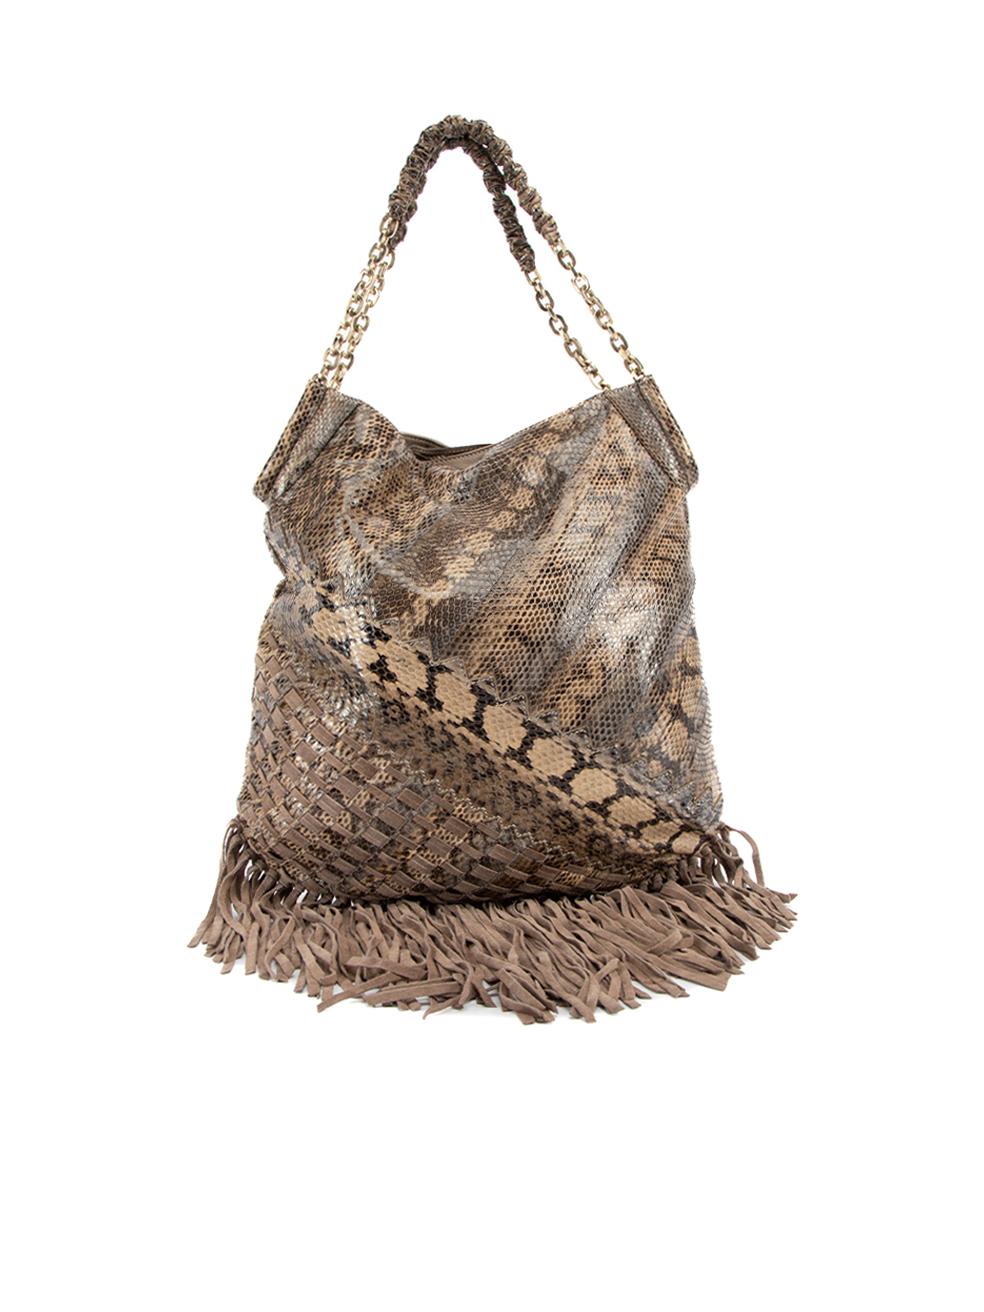 Pre-Loved Jimmy Choo Women's Snakeskin Fringed Tatum Tote Bag In Excellent Condition In London, GB